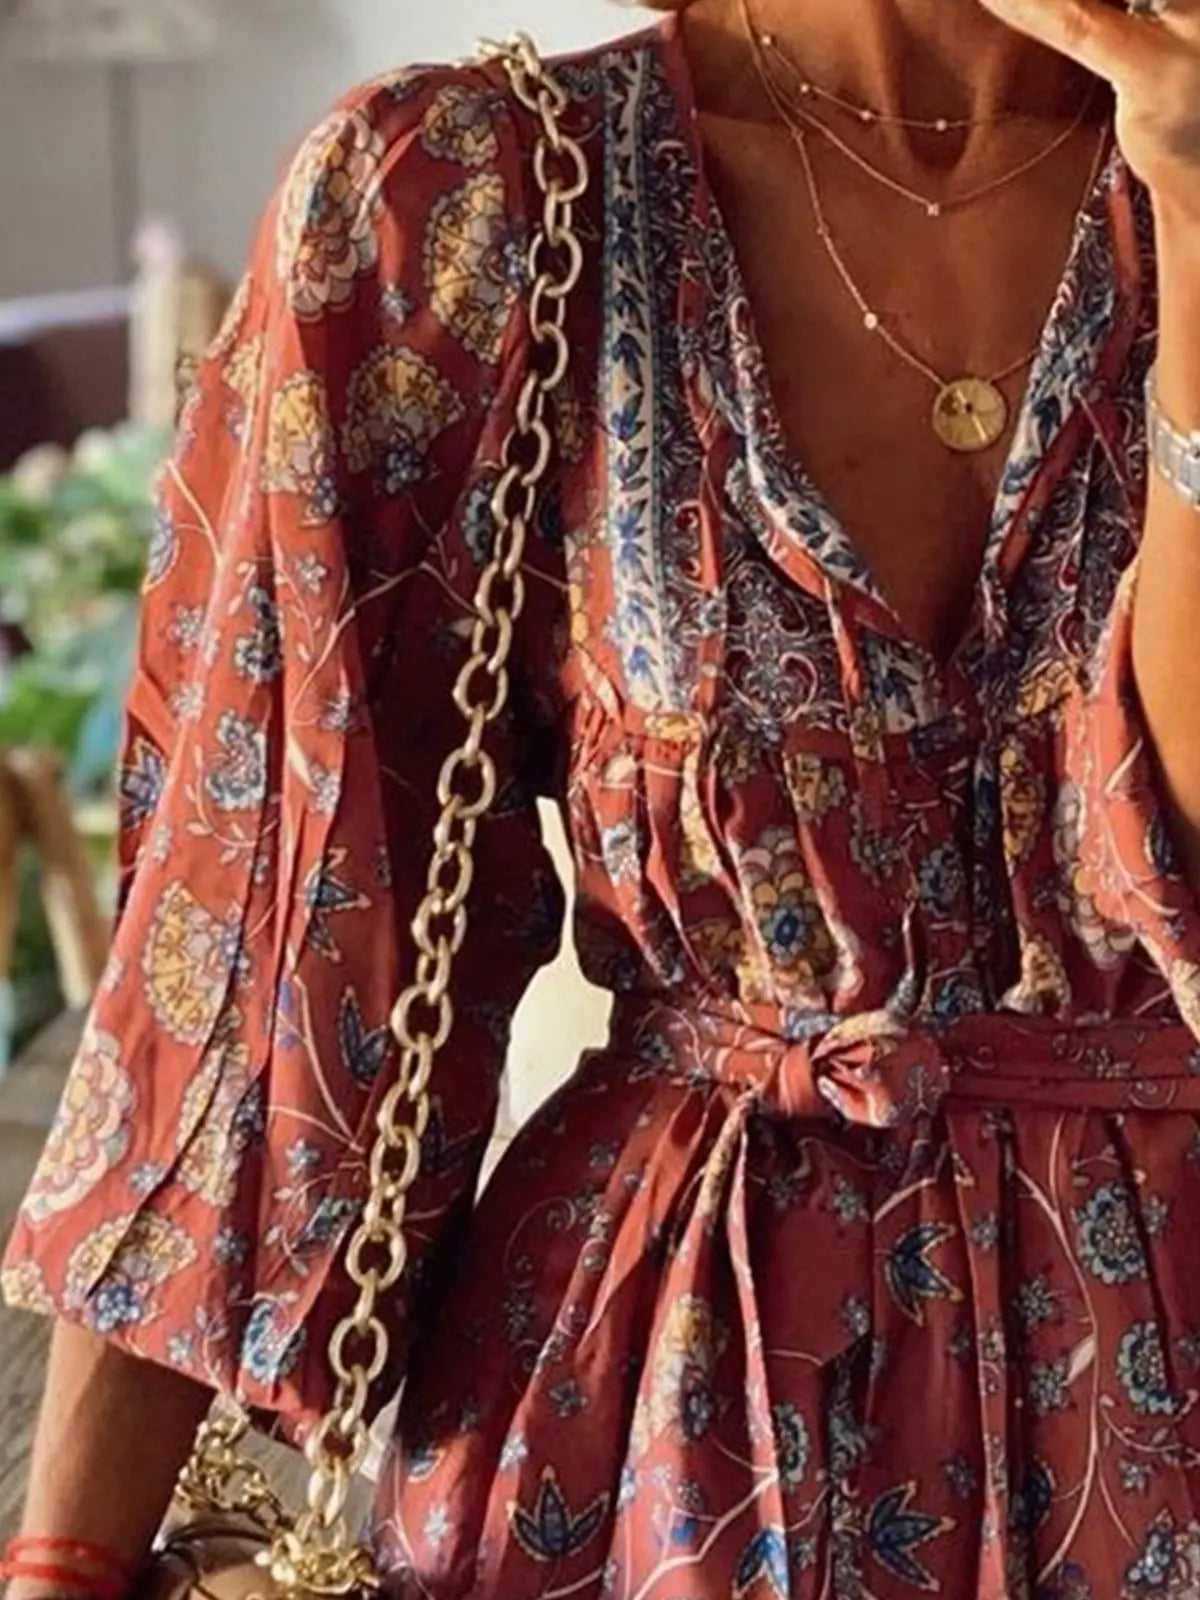 New Women Chic Plus Size Summer Comfortable Boho Vintage Holiday Floral Dresses mysite